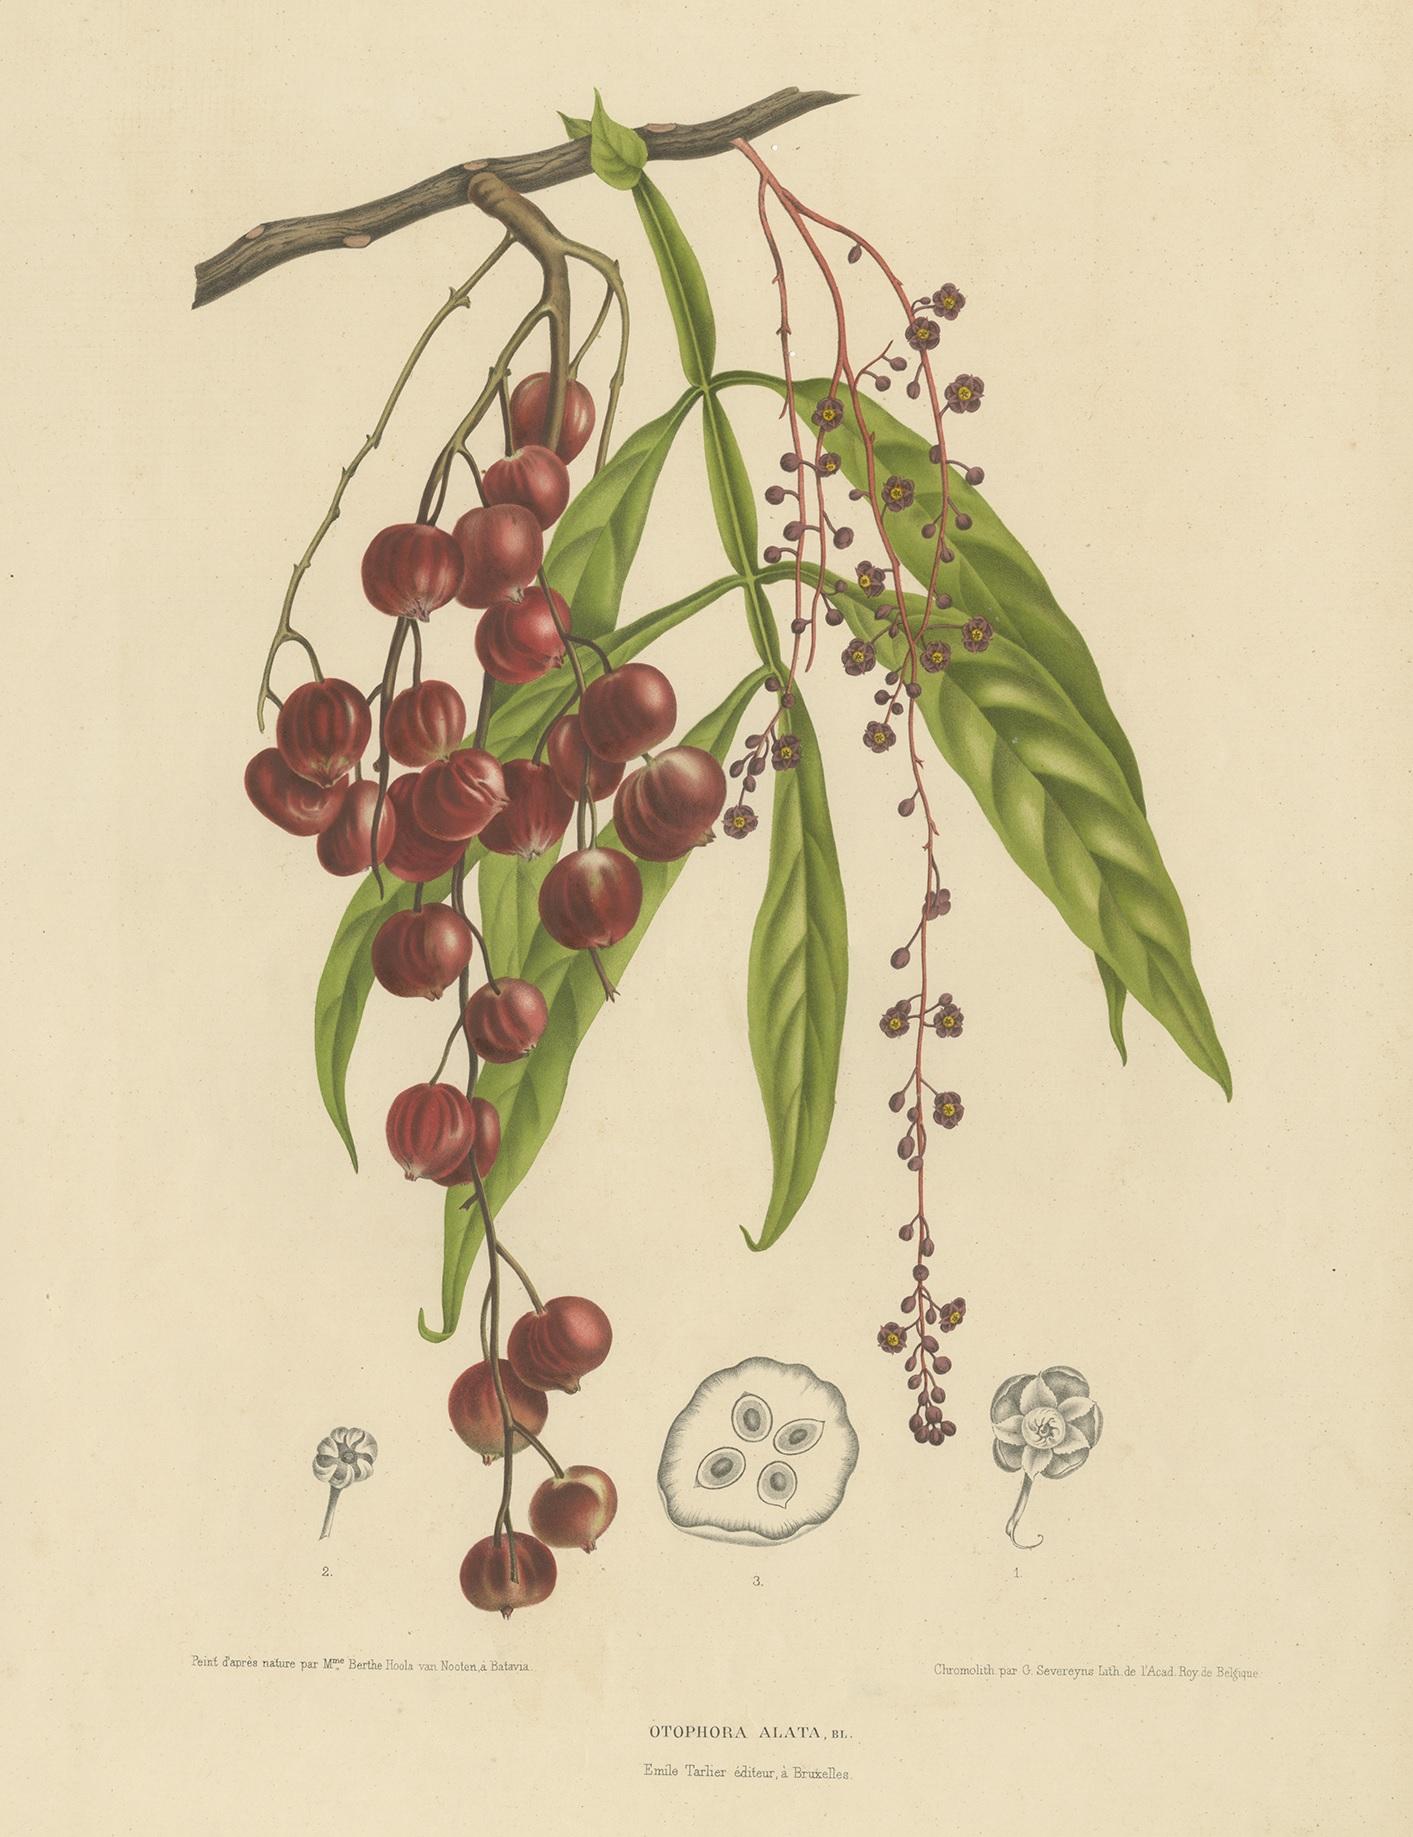 Antique print titled 'Otophora Alata'. Large lithograph of the tepisanthes alata tree. The edible fruit is gathered from the wild for local use. The tree is also occasionally cultivated for its fruit in Indonesia. This print originates from 'Fleurs,